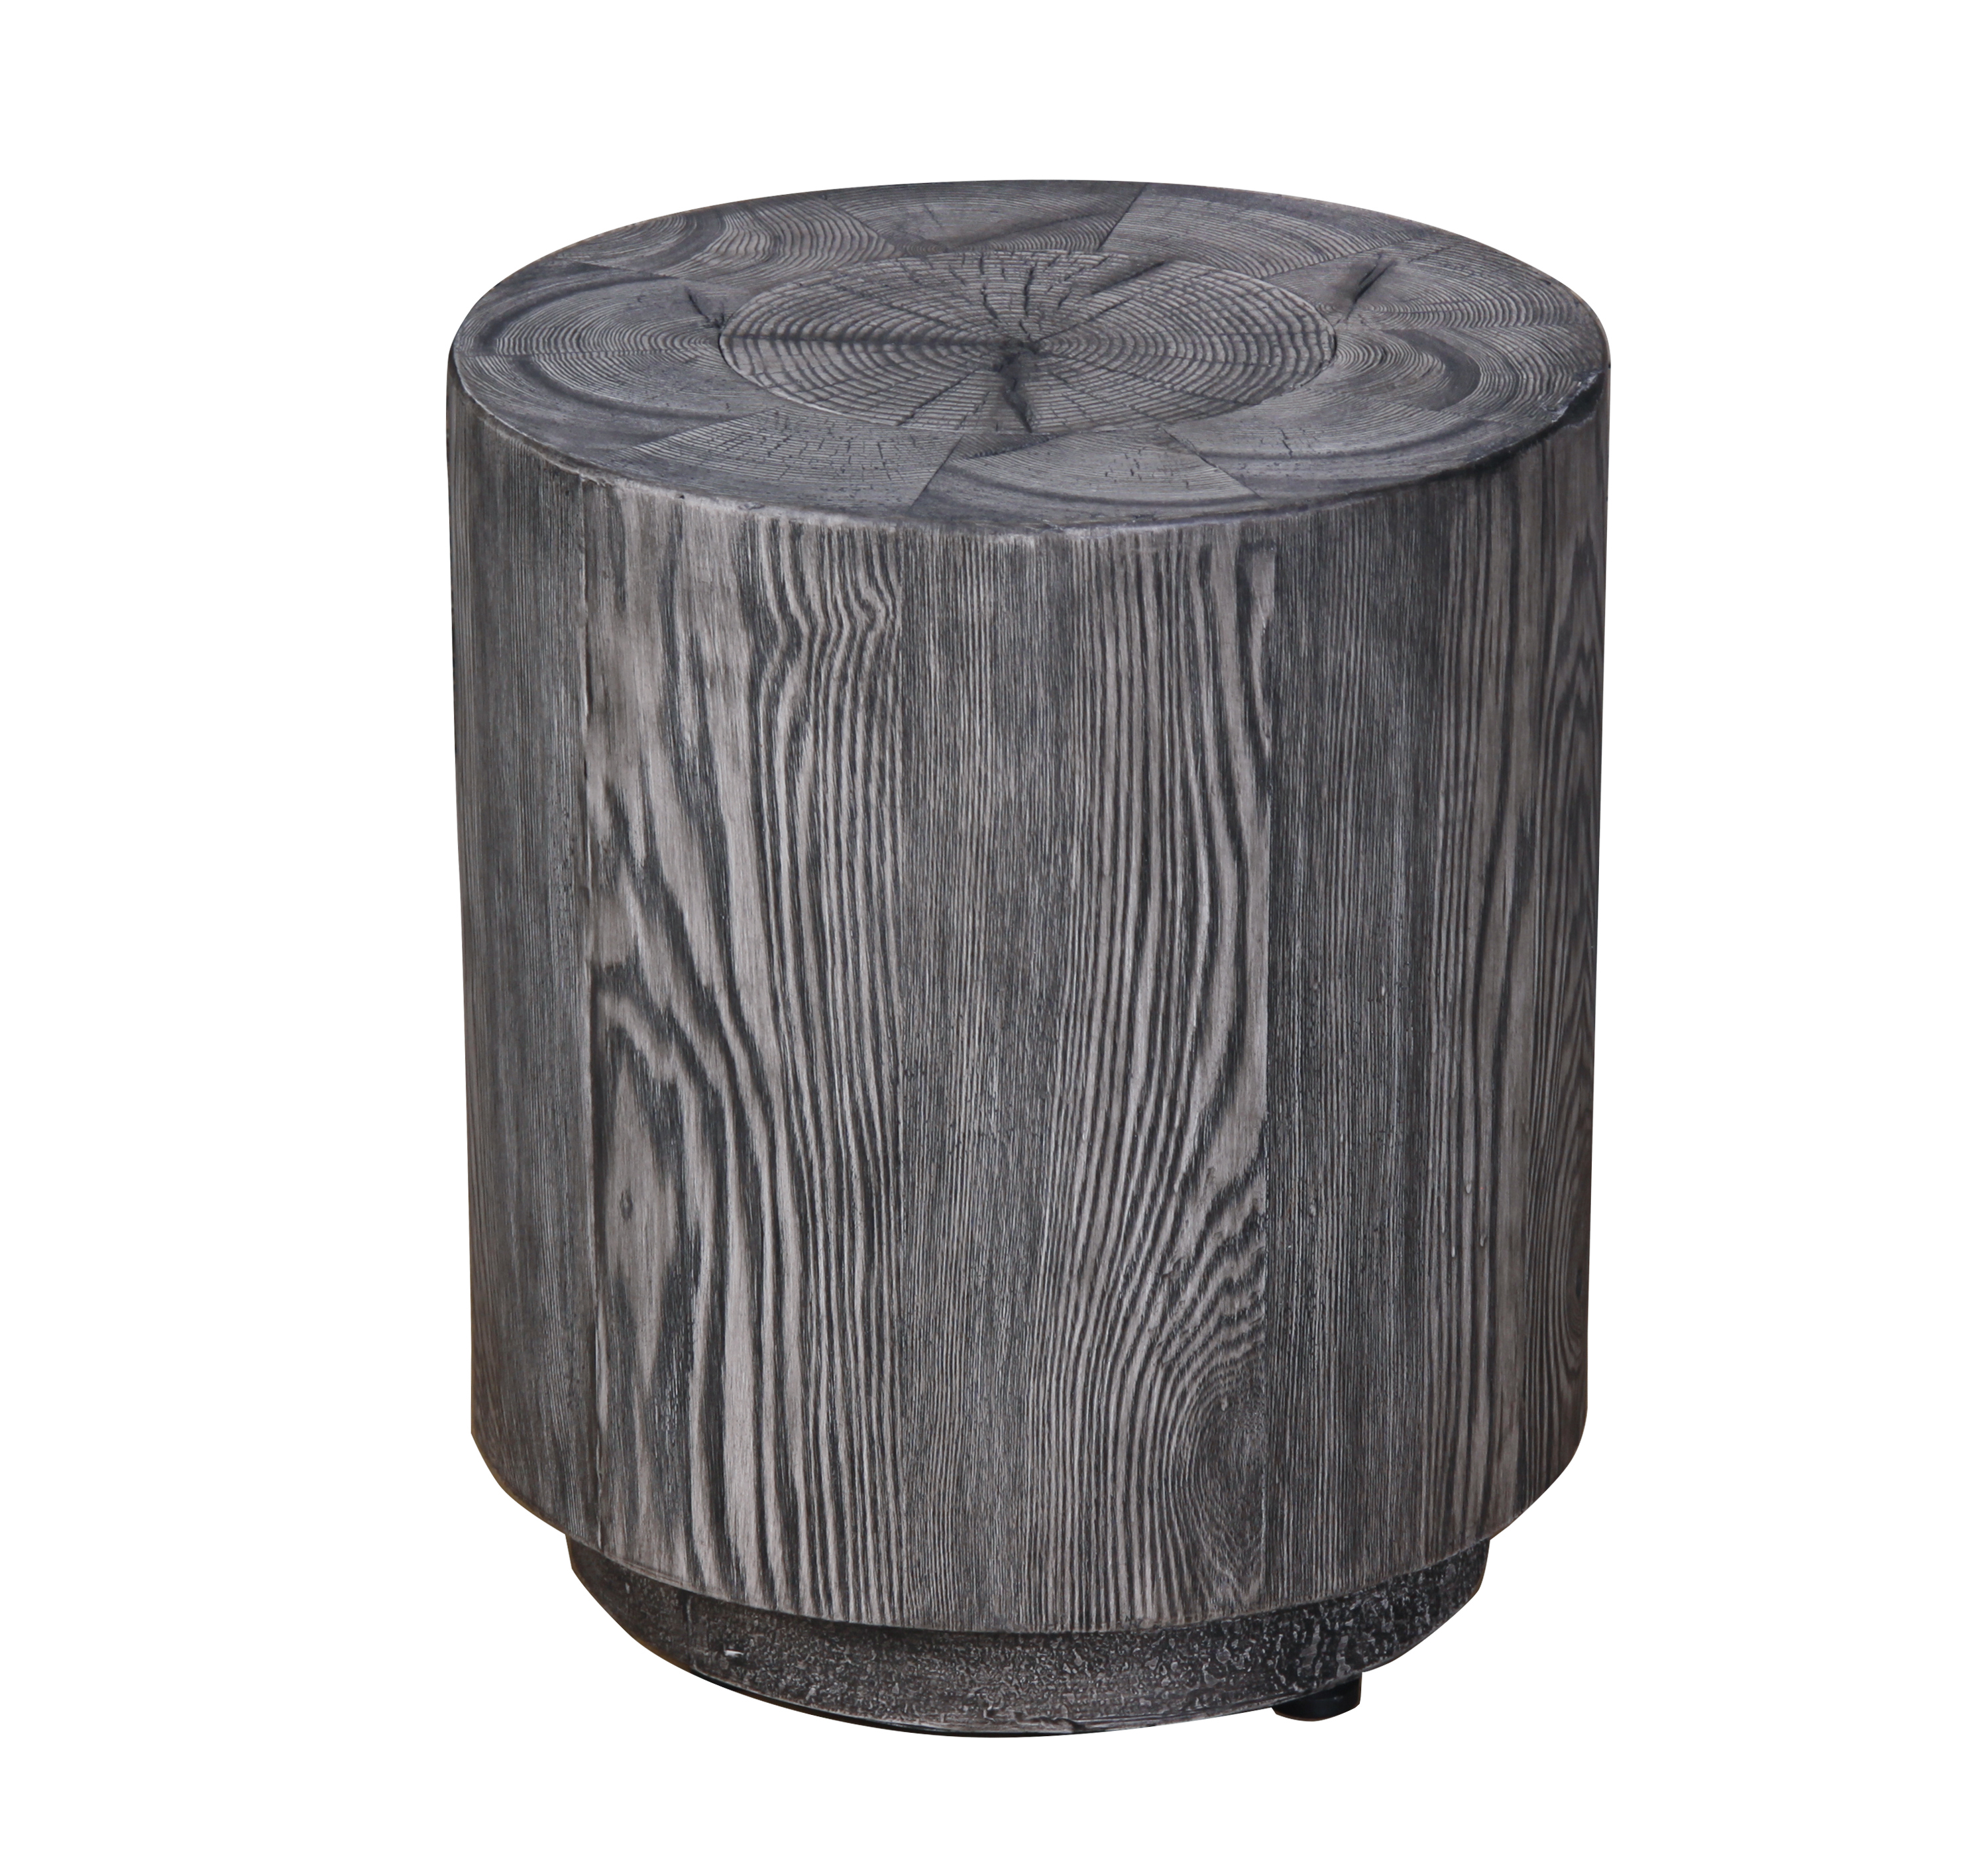 Outdoor furniture factory in china - Round end table in black